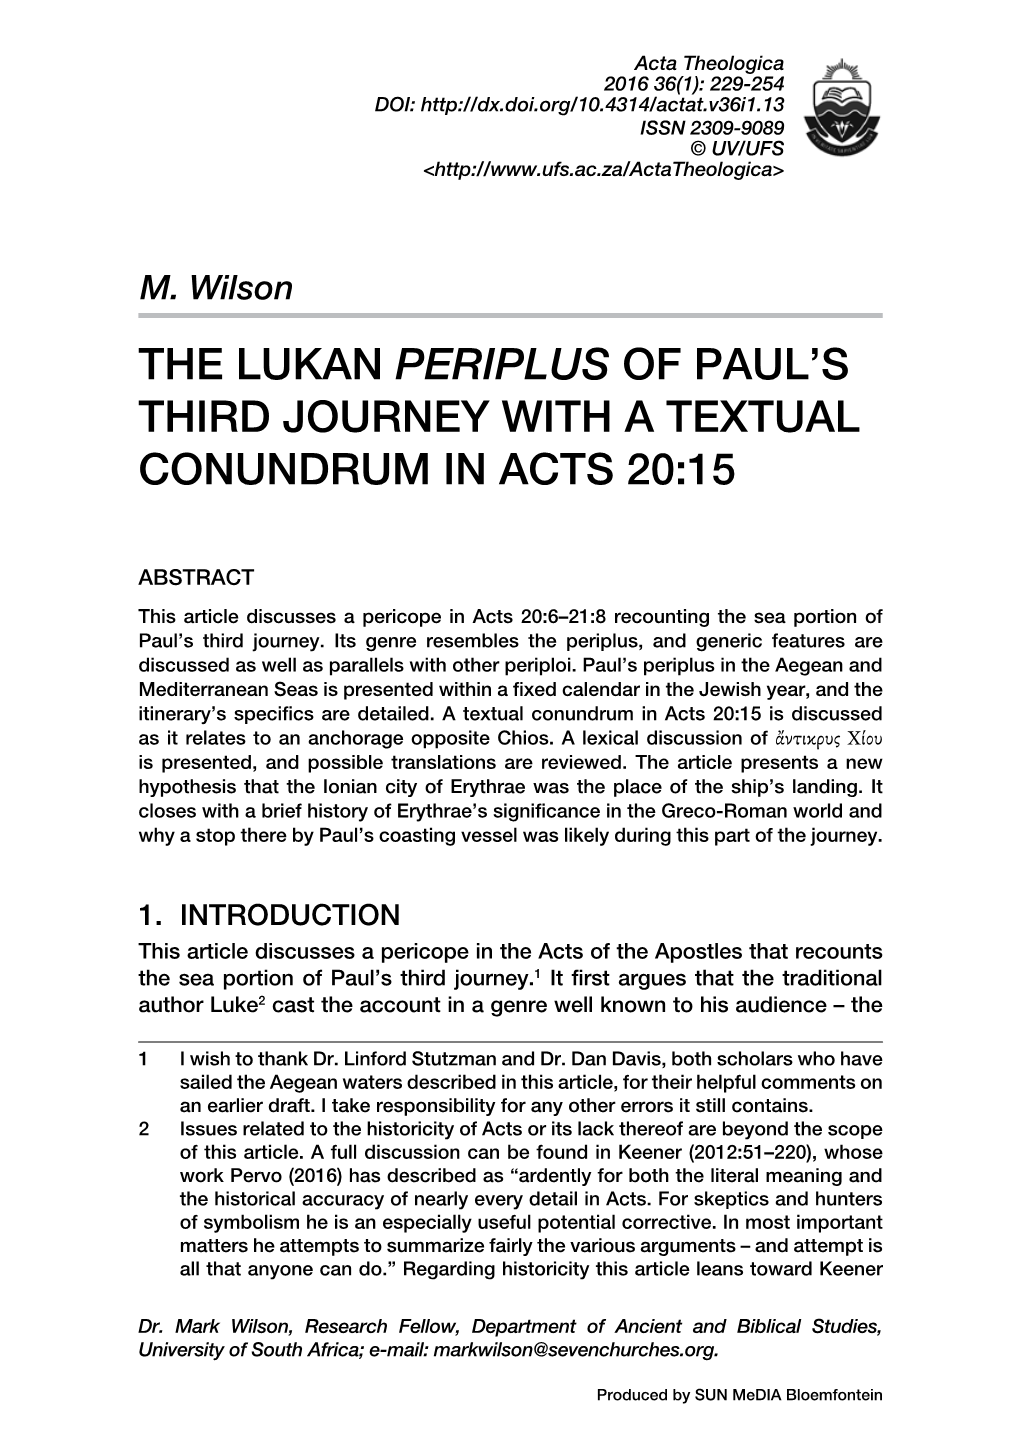 The Lukan Periplus of Paul's Third Journey with A